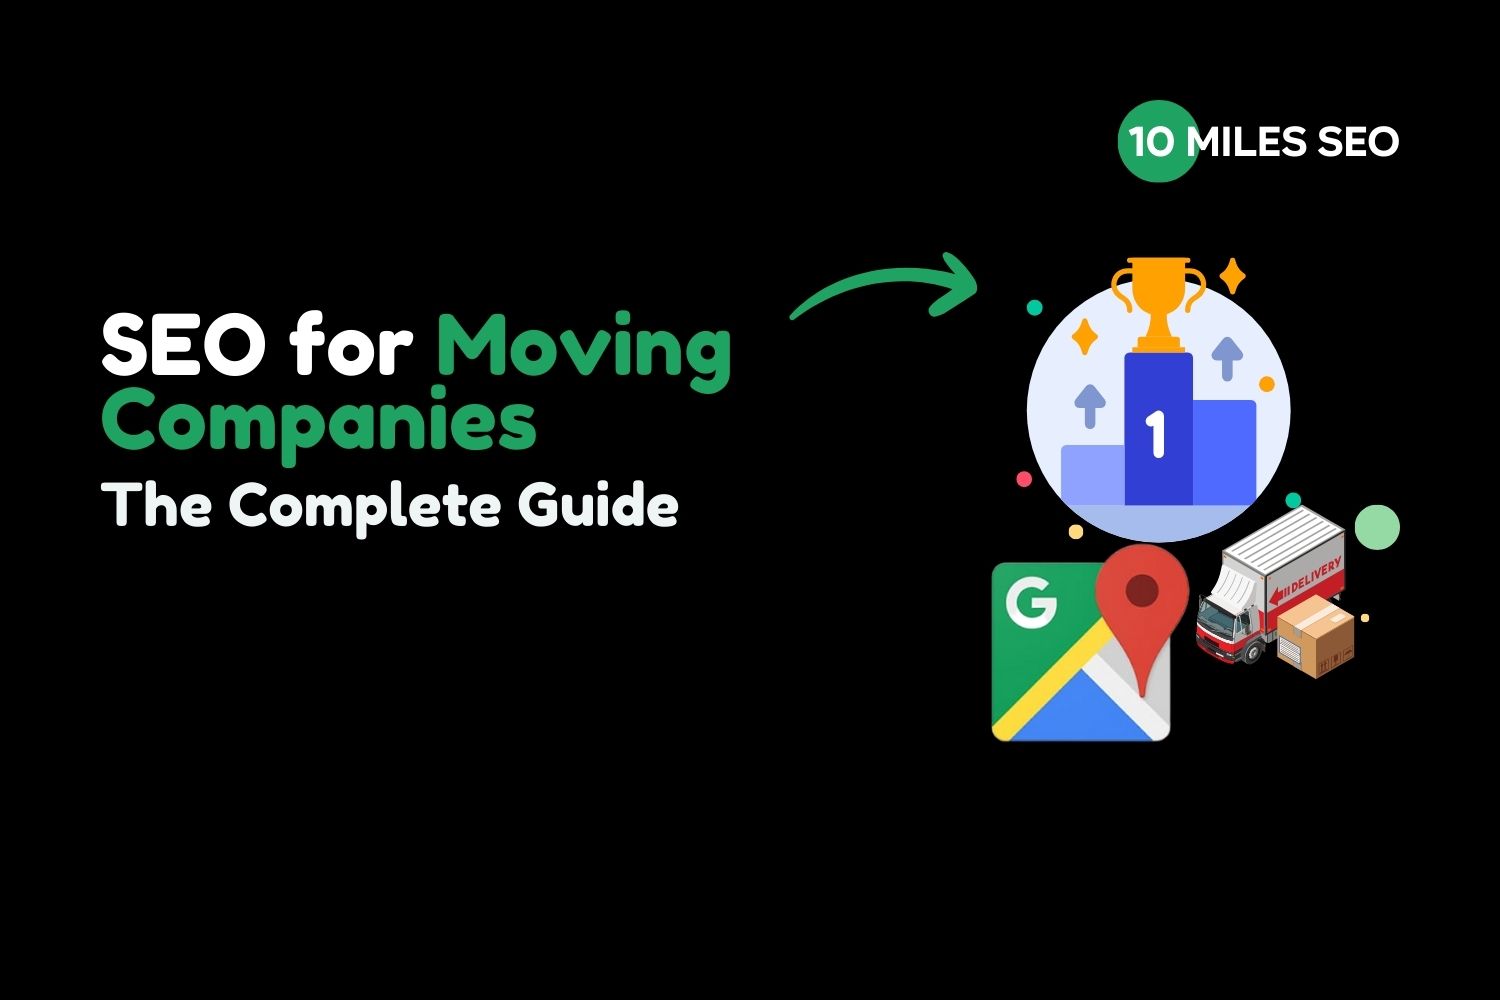 SEO for Moving Companies The Complete Guide